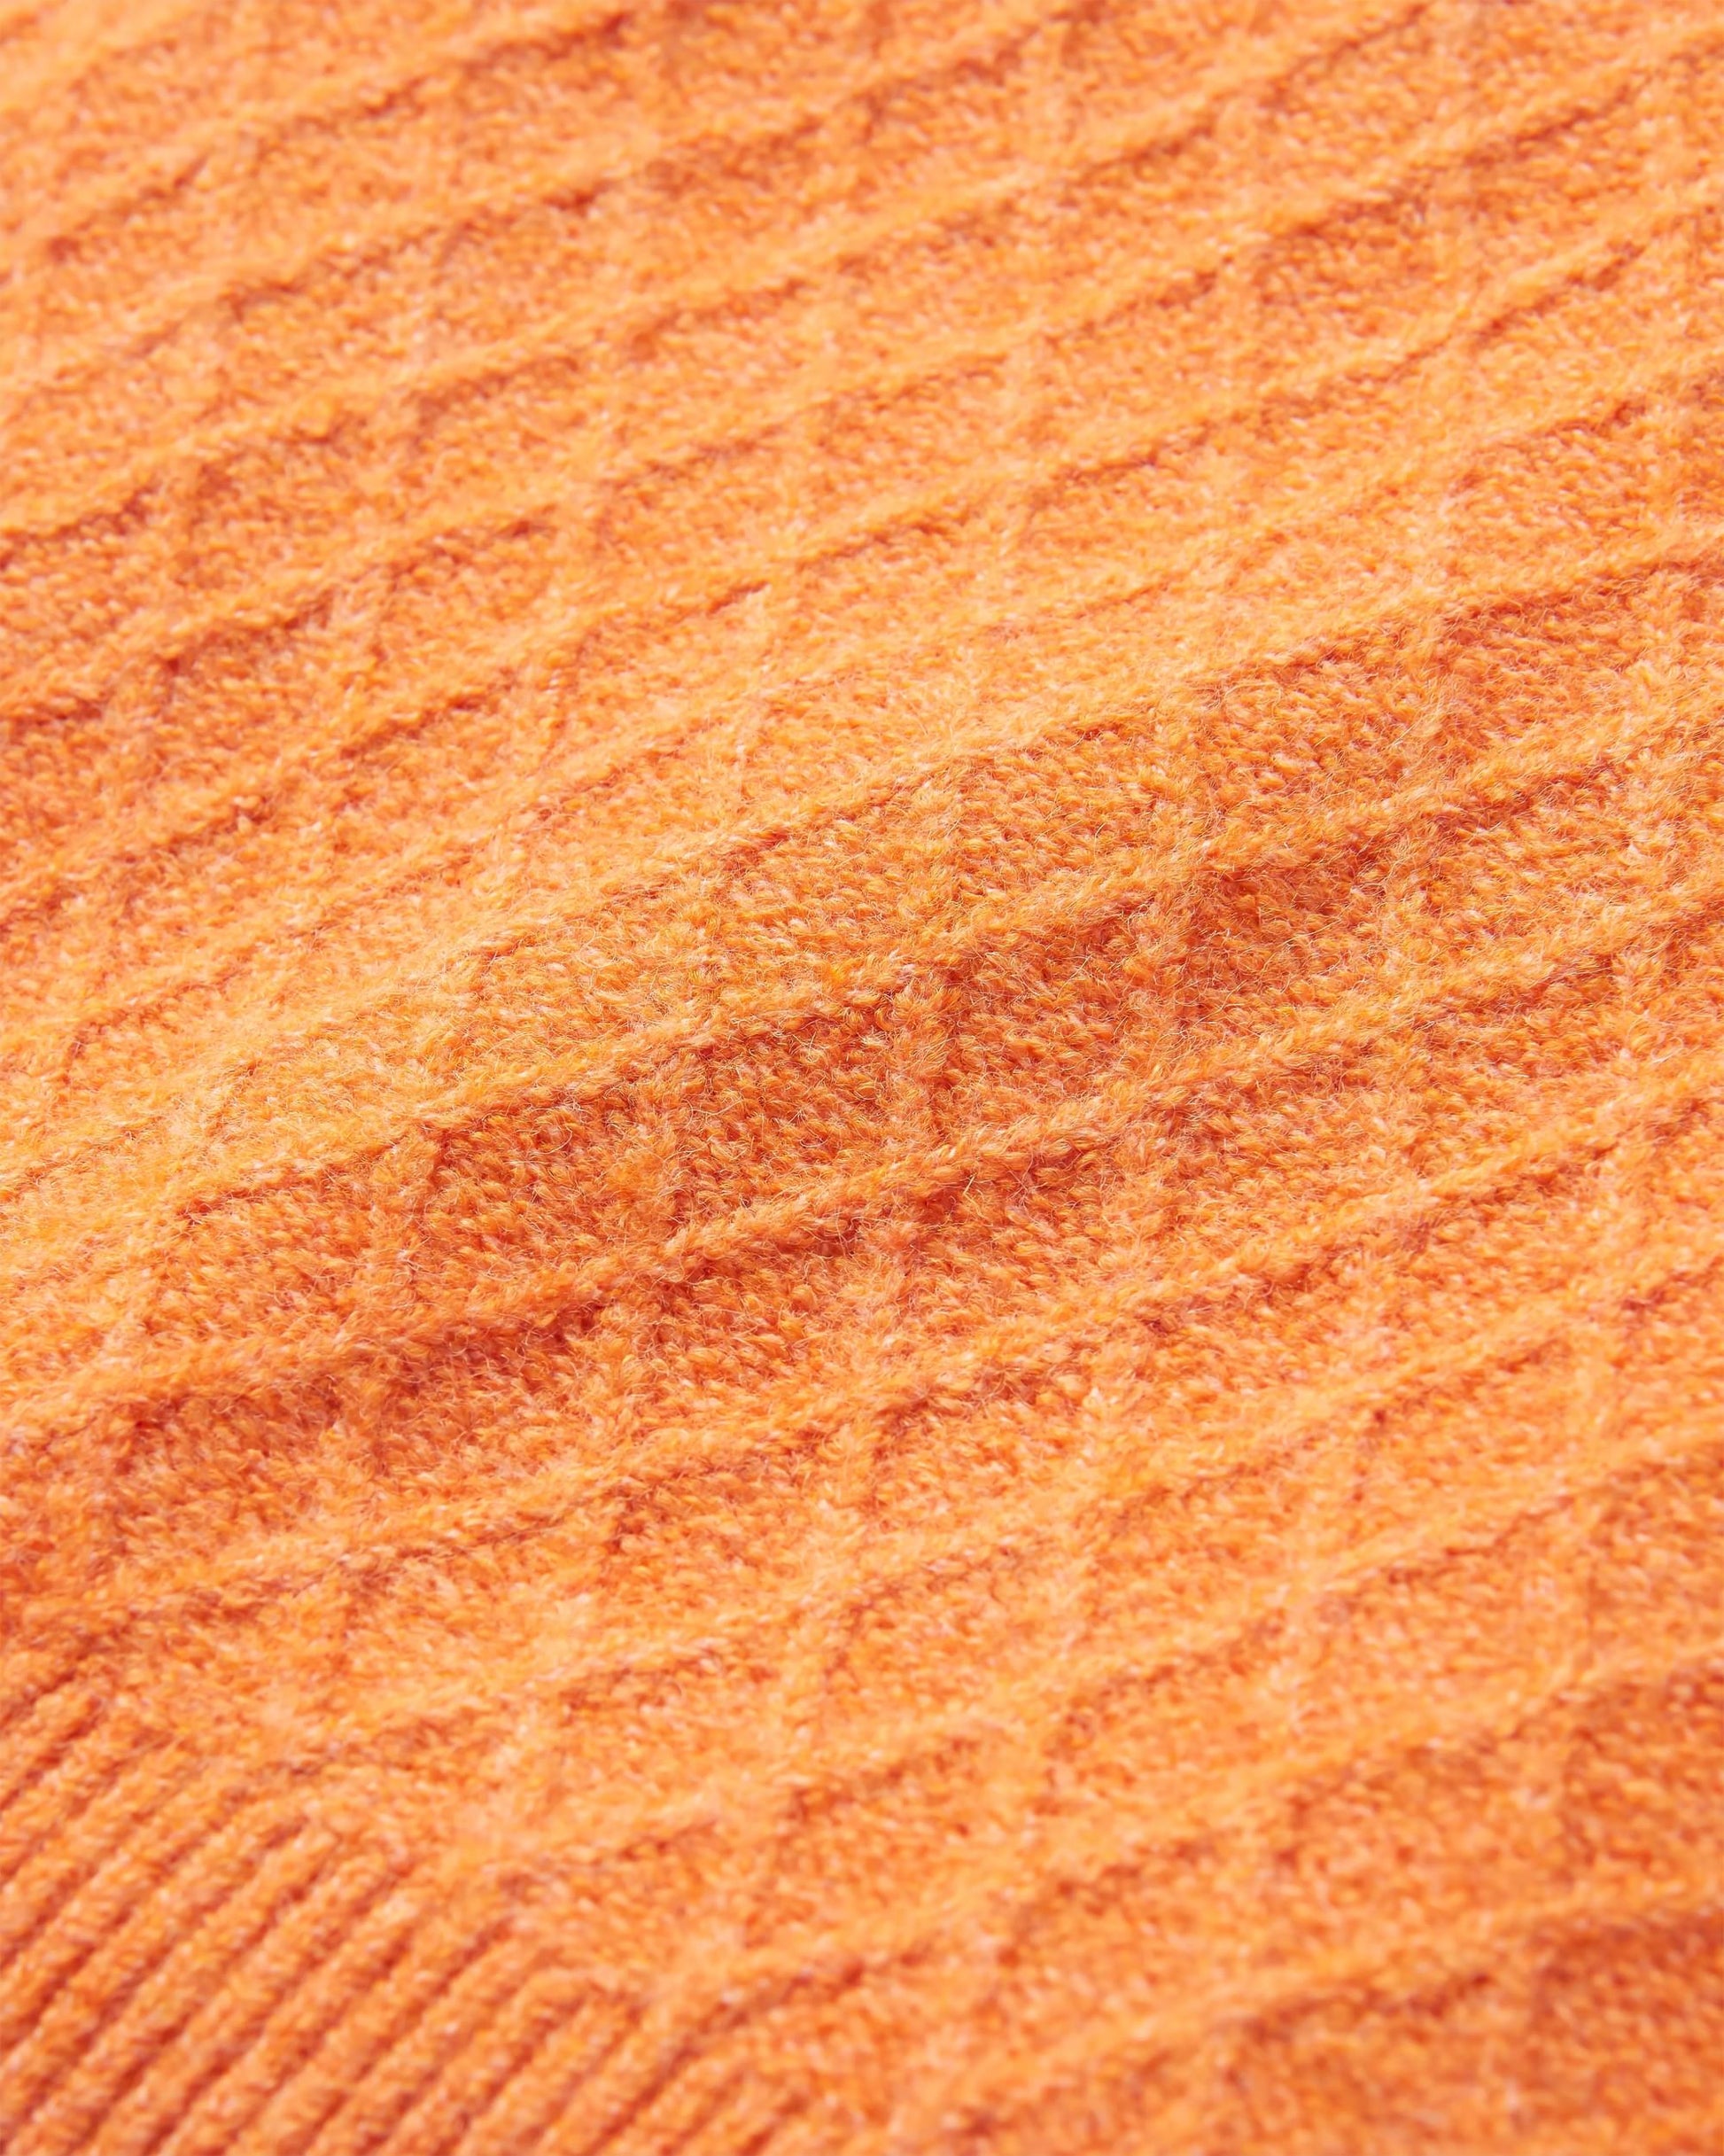 Hinterland Recycled Knitted Jumper - Apricot